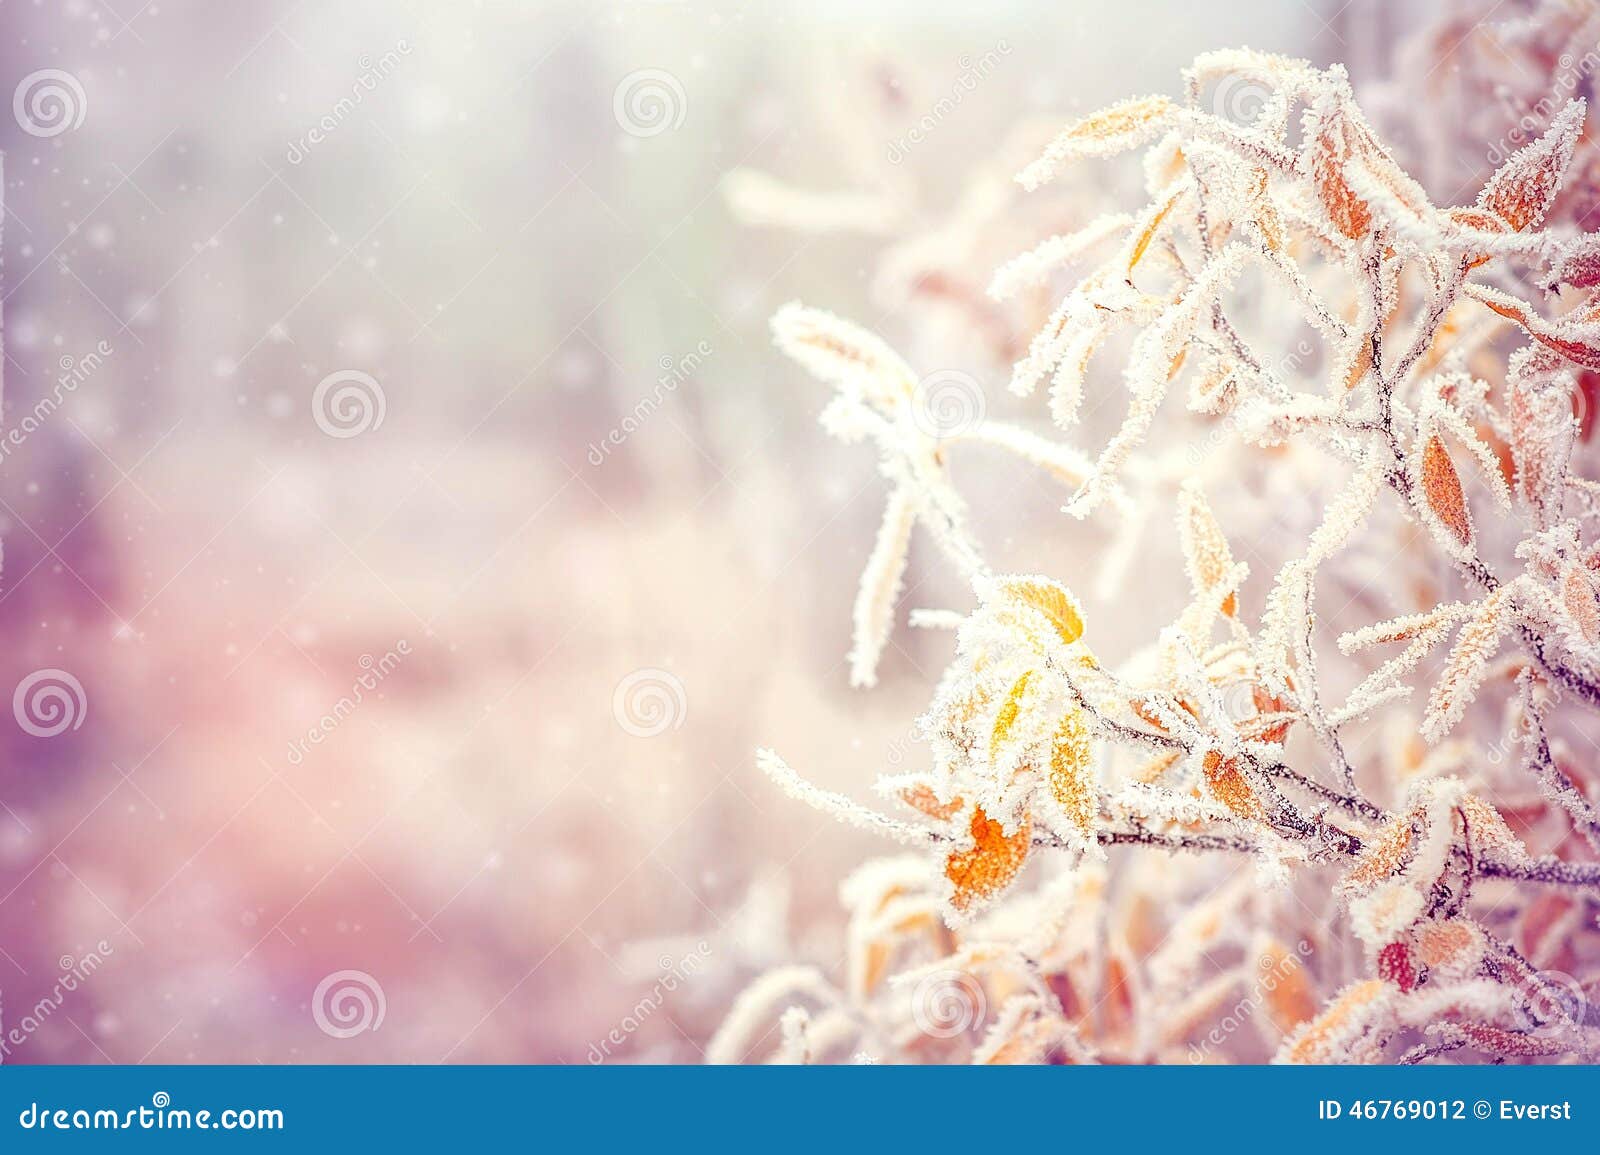 winter background with snow branches tree leaves